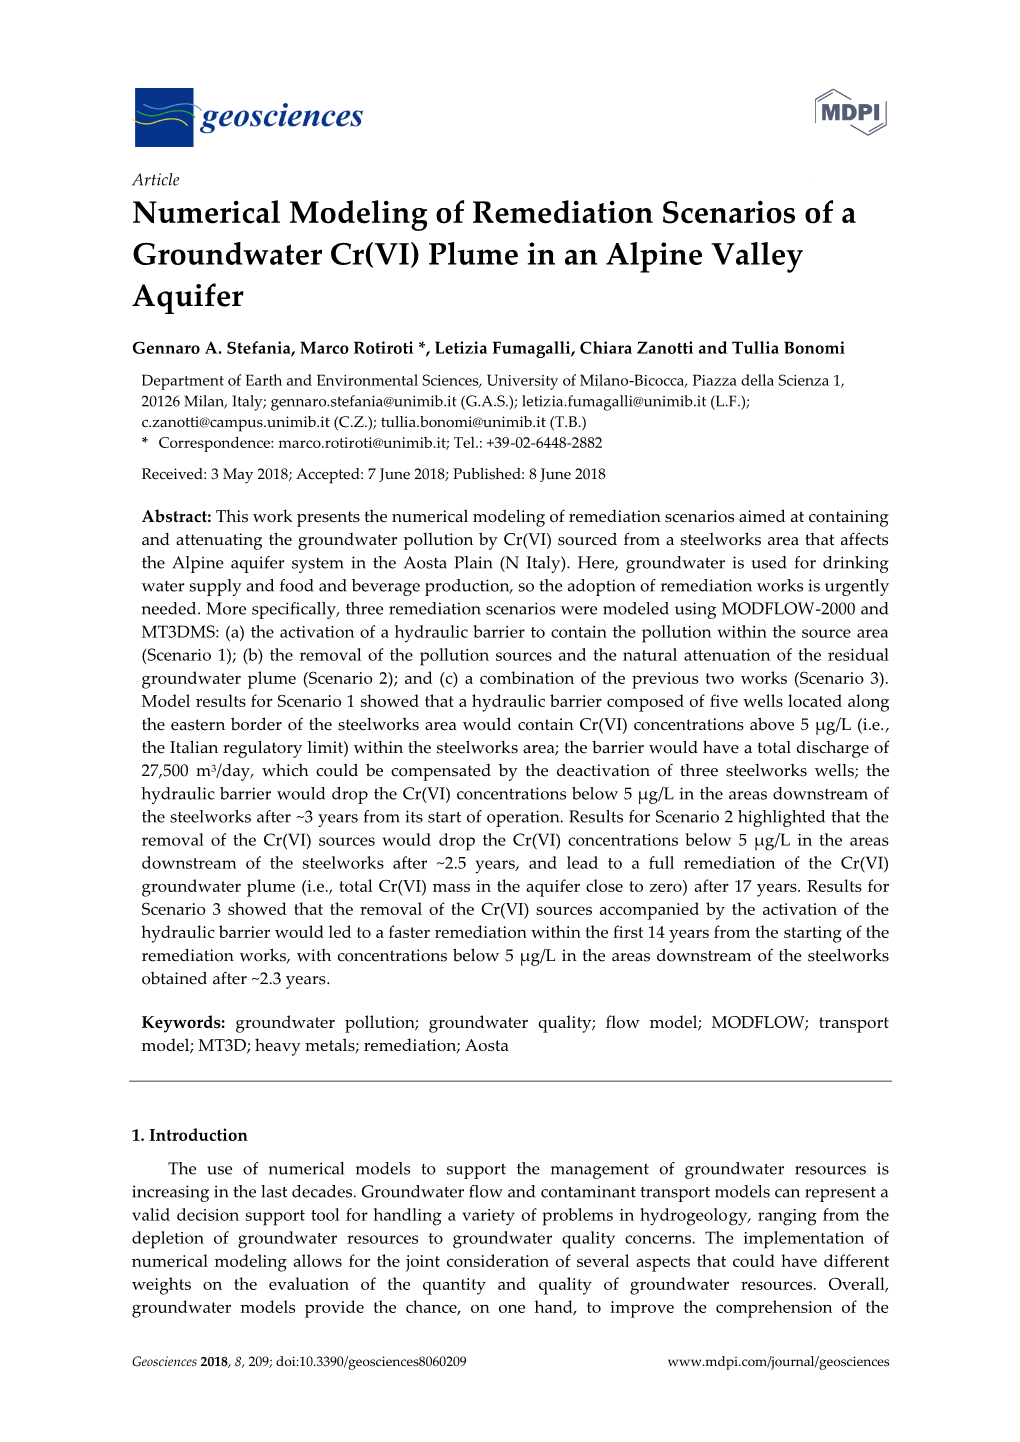 Numerical Modeling of Remediation Scenarios of a Groundwater Cr(VI) Plume in an Alpine Valley Aquifer